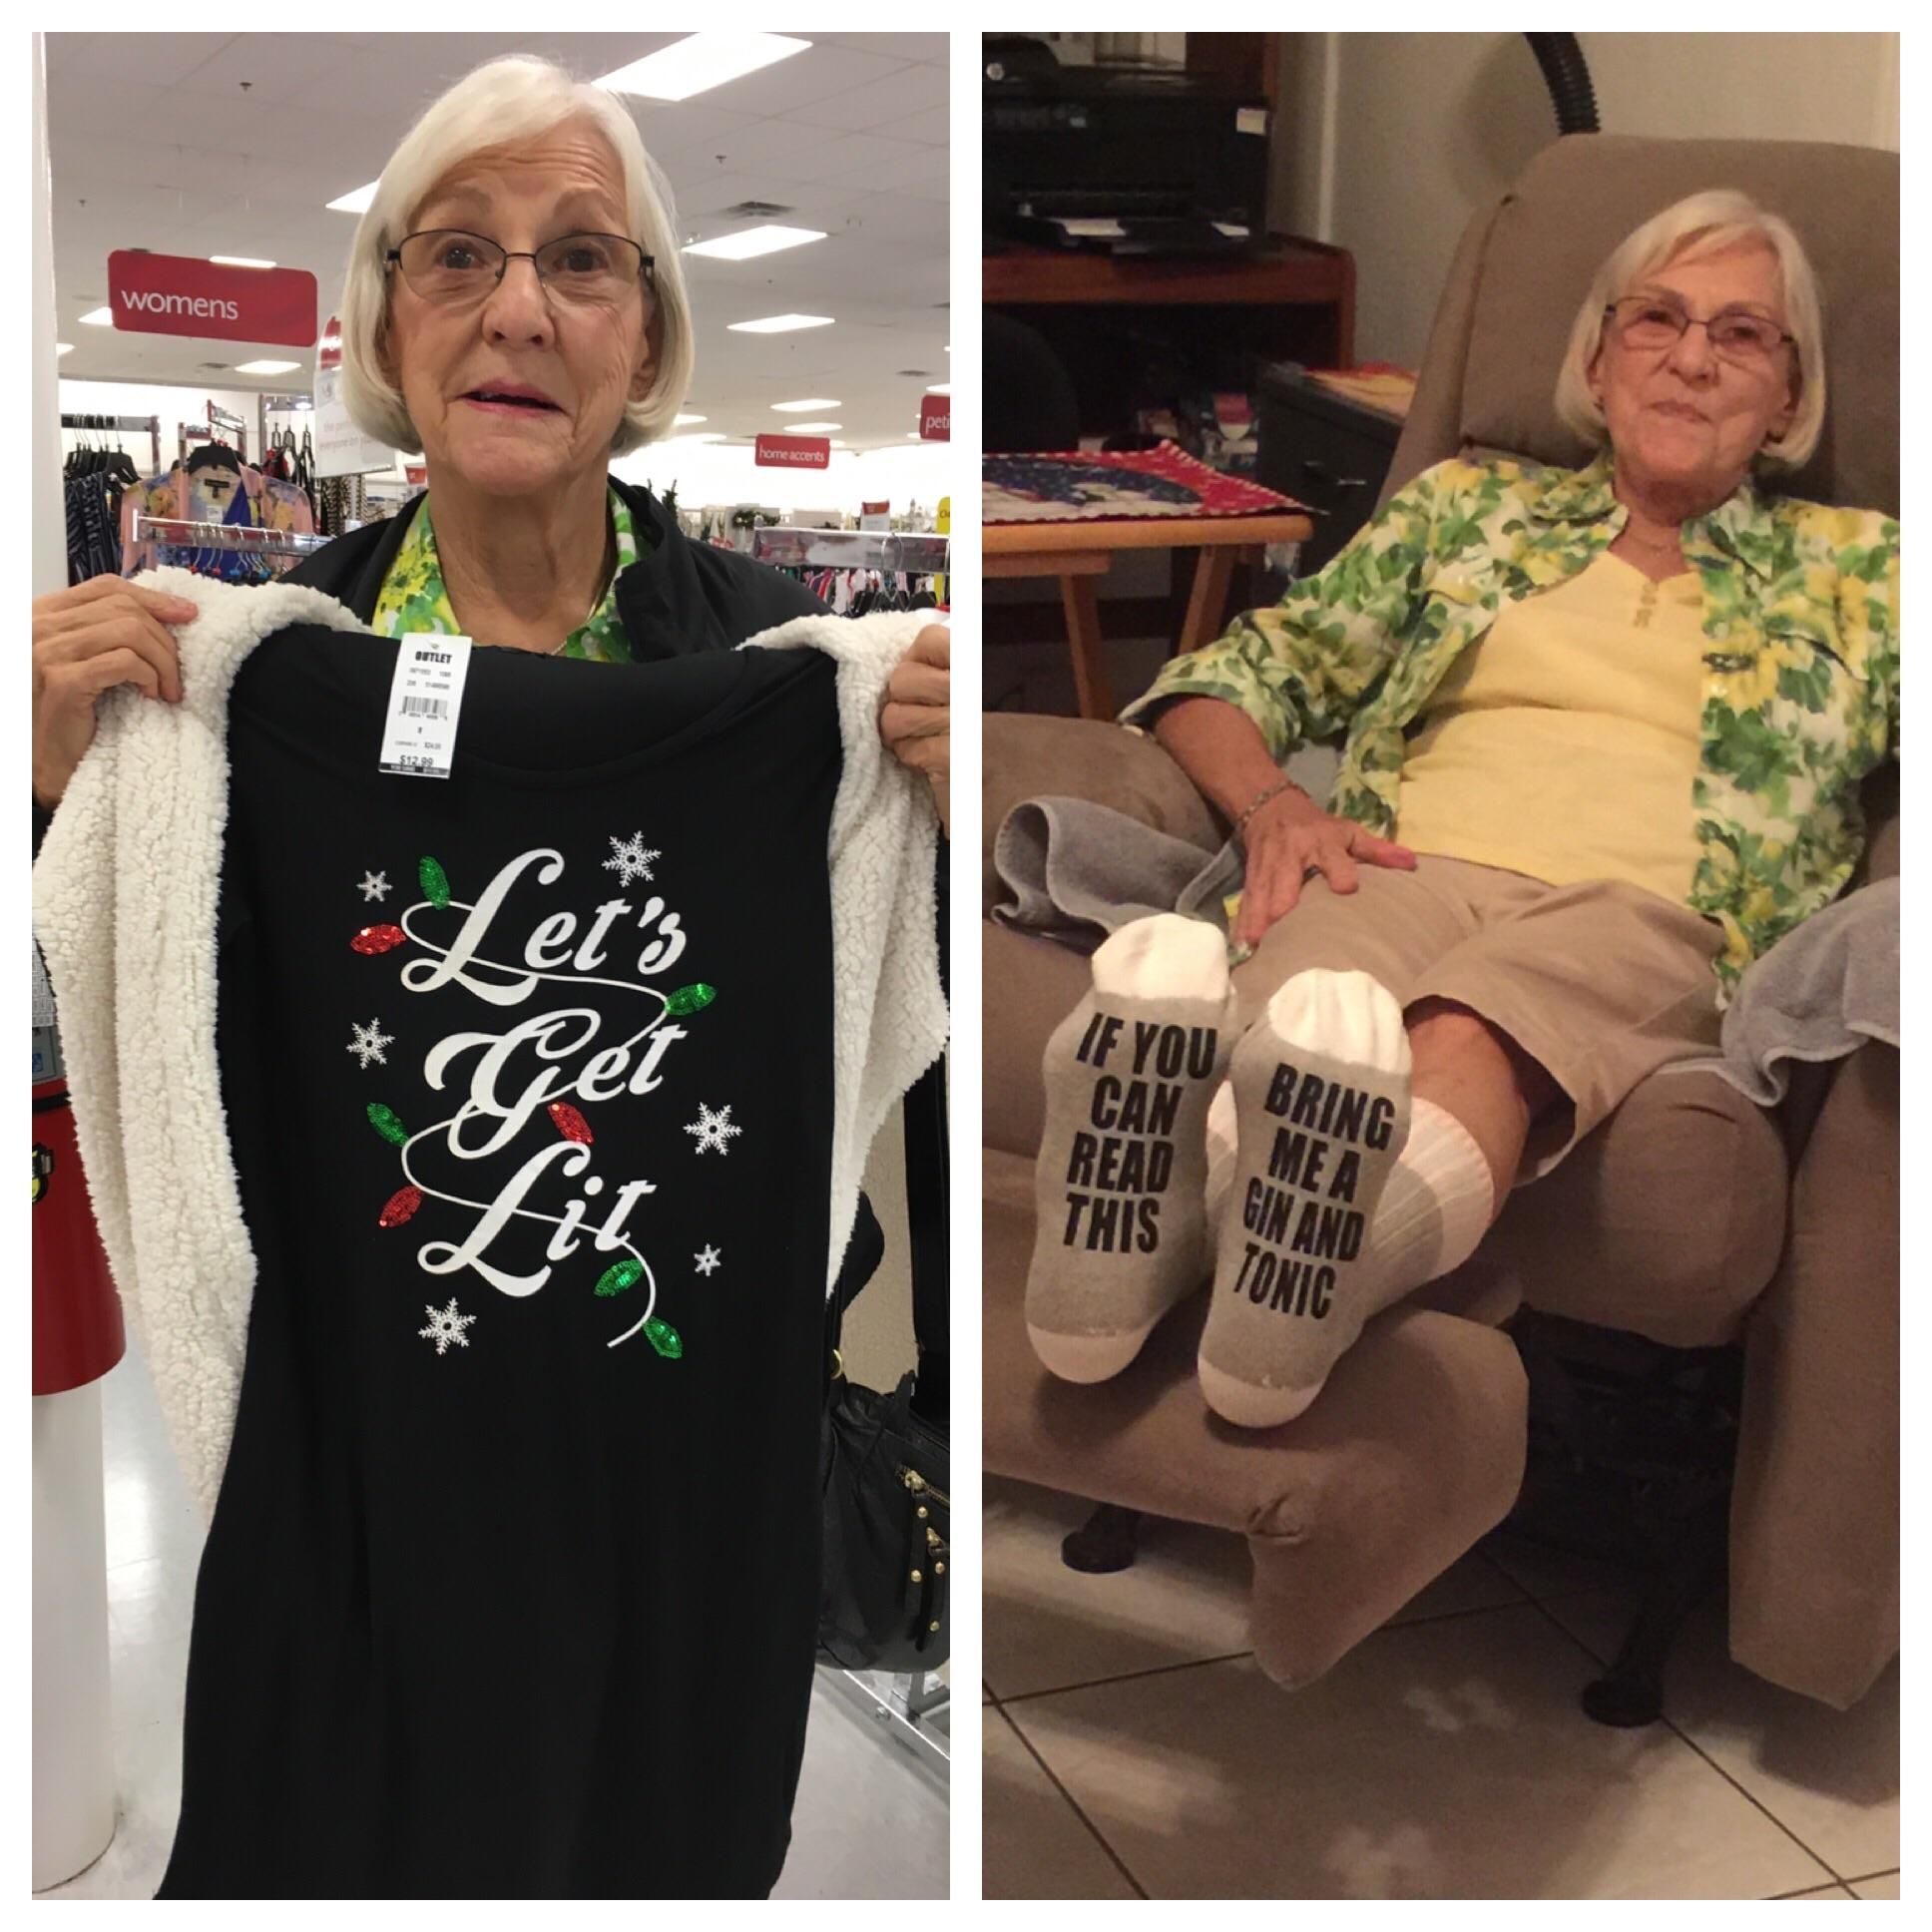 Turning 80 in April, she buys her own clothes.